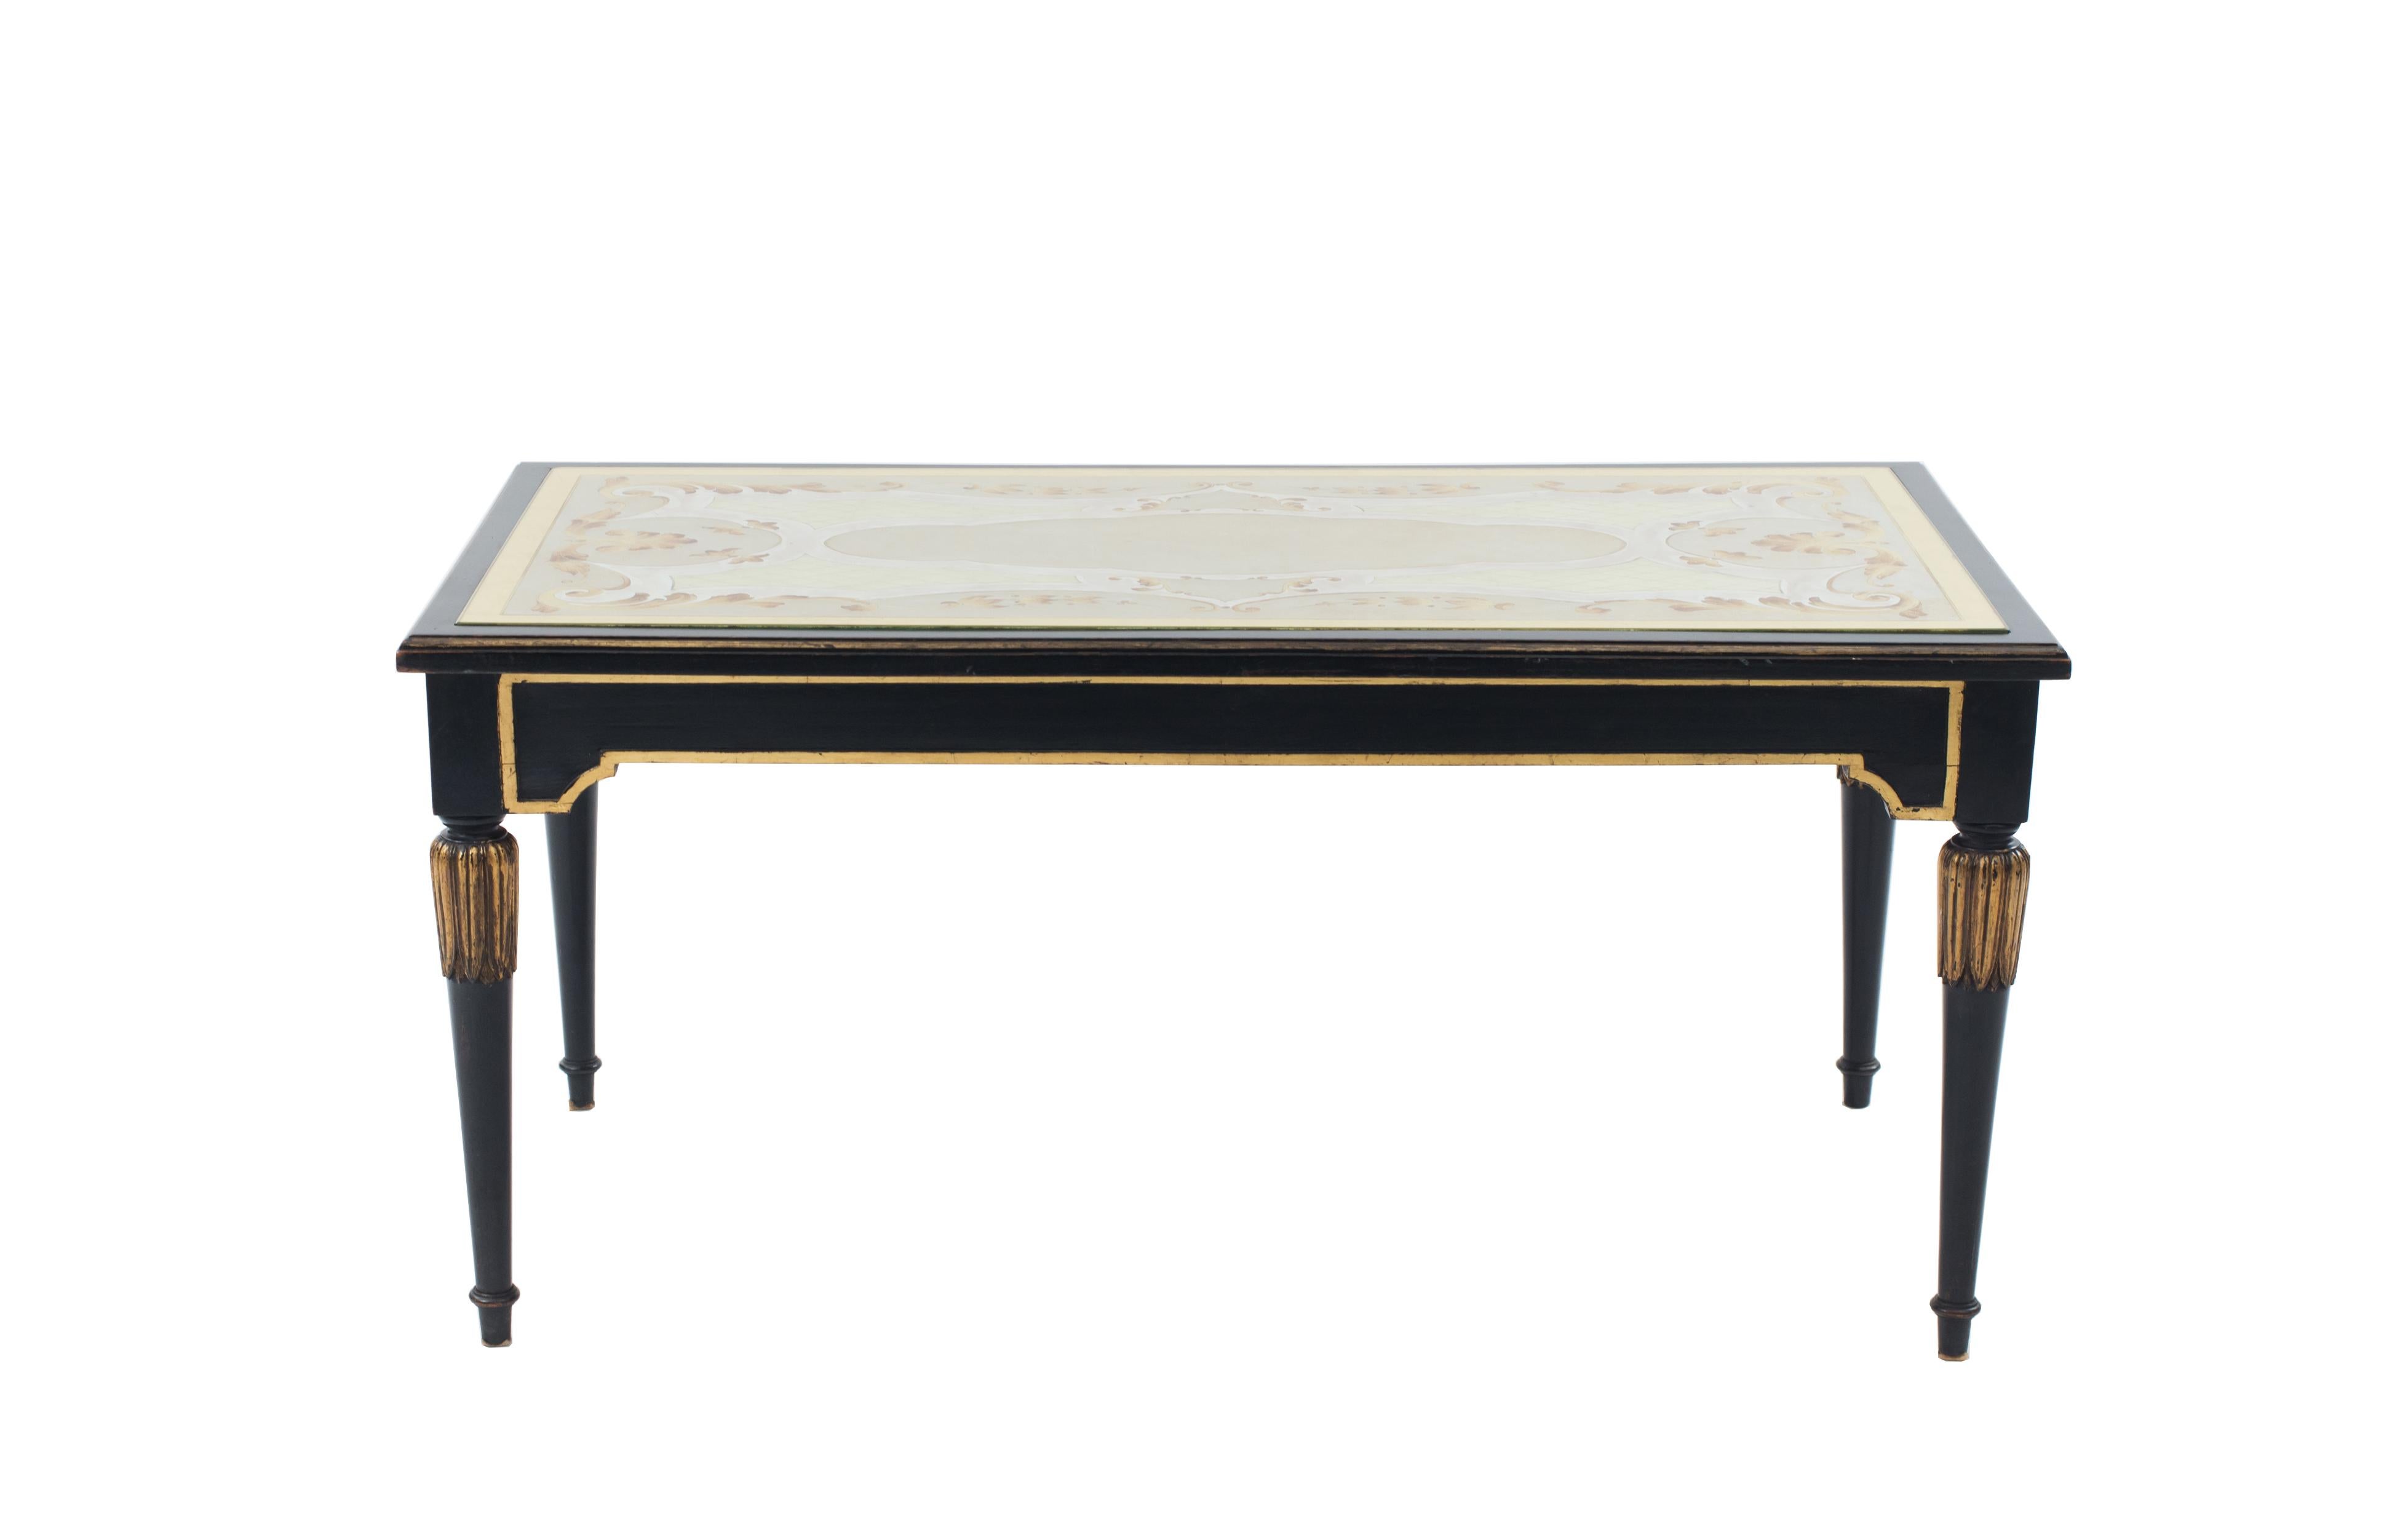 Mid-Century (circa 1950) ebonized coffee table with an √©glomis√© top resting on tapered legs with gilt detail (attributed to: MAISON JANSEN)
